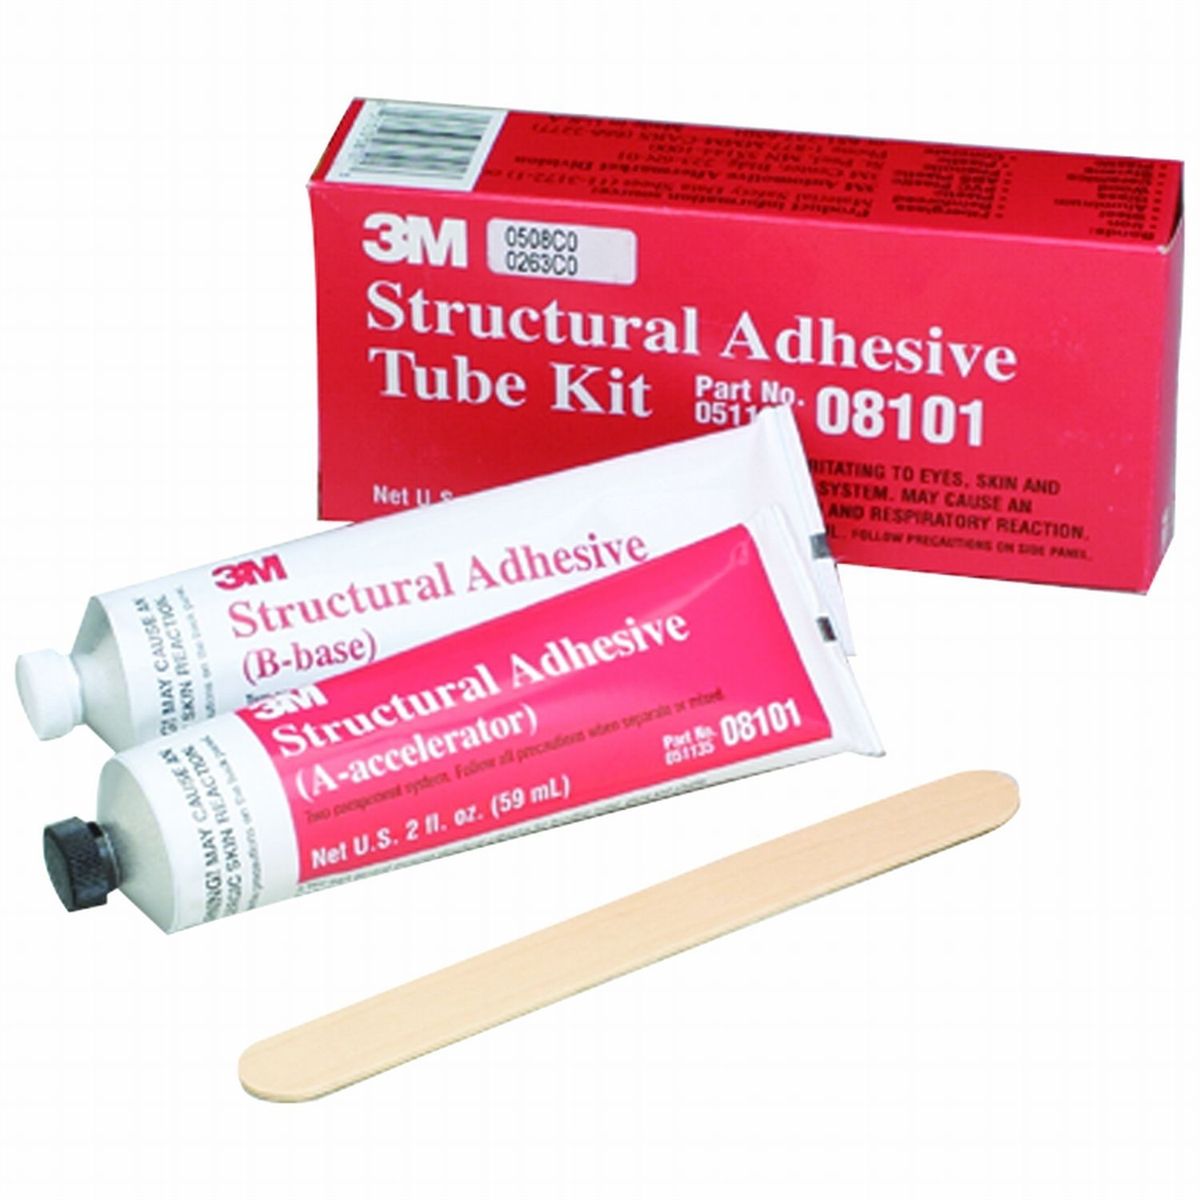 Structural Adhesive,Two 2 Fluid Ounce Tubes Per Kit